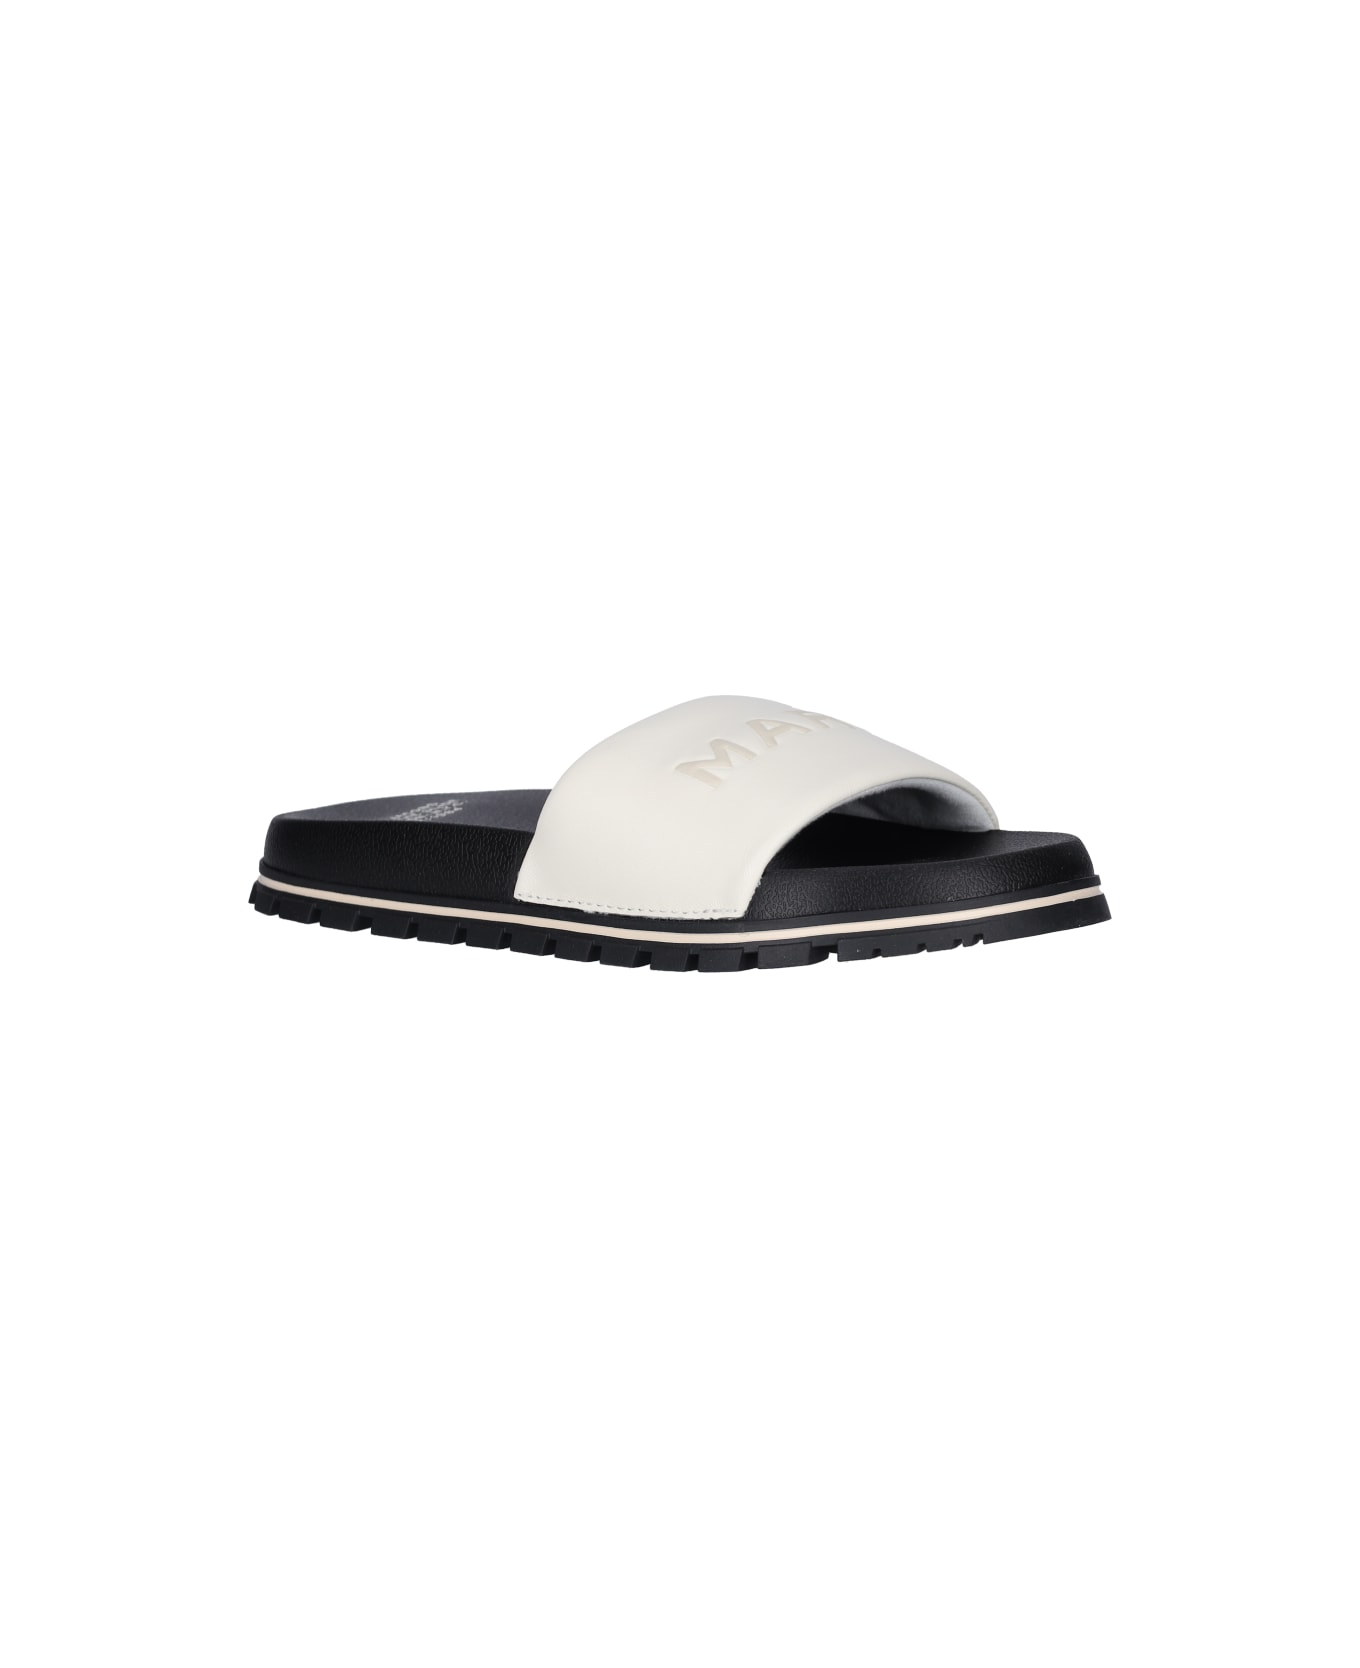 Marc Jacobs 'the Leather' Slide Sandals - White サンダル